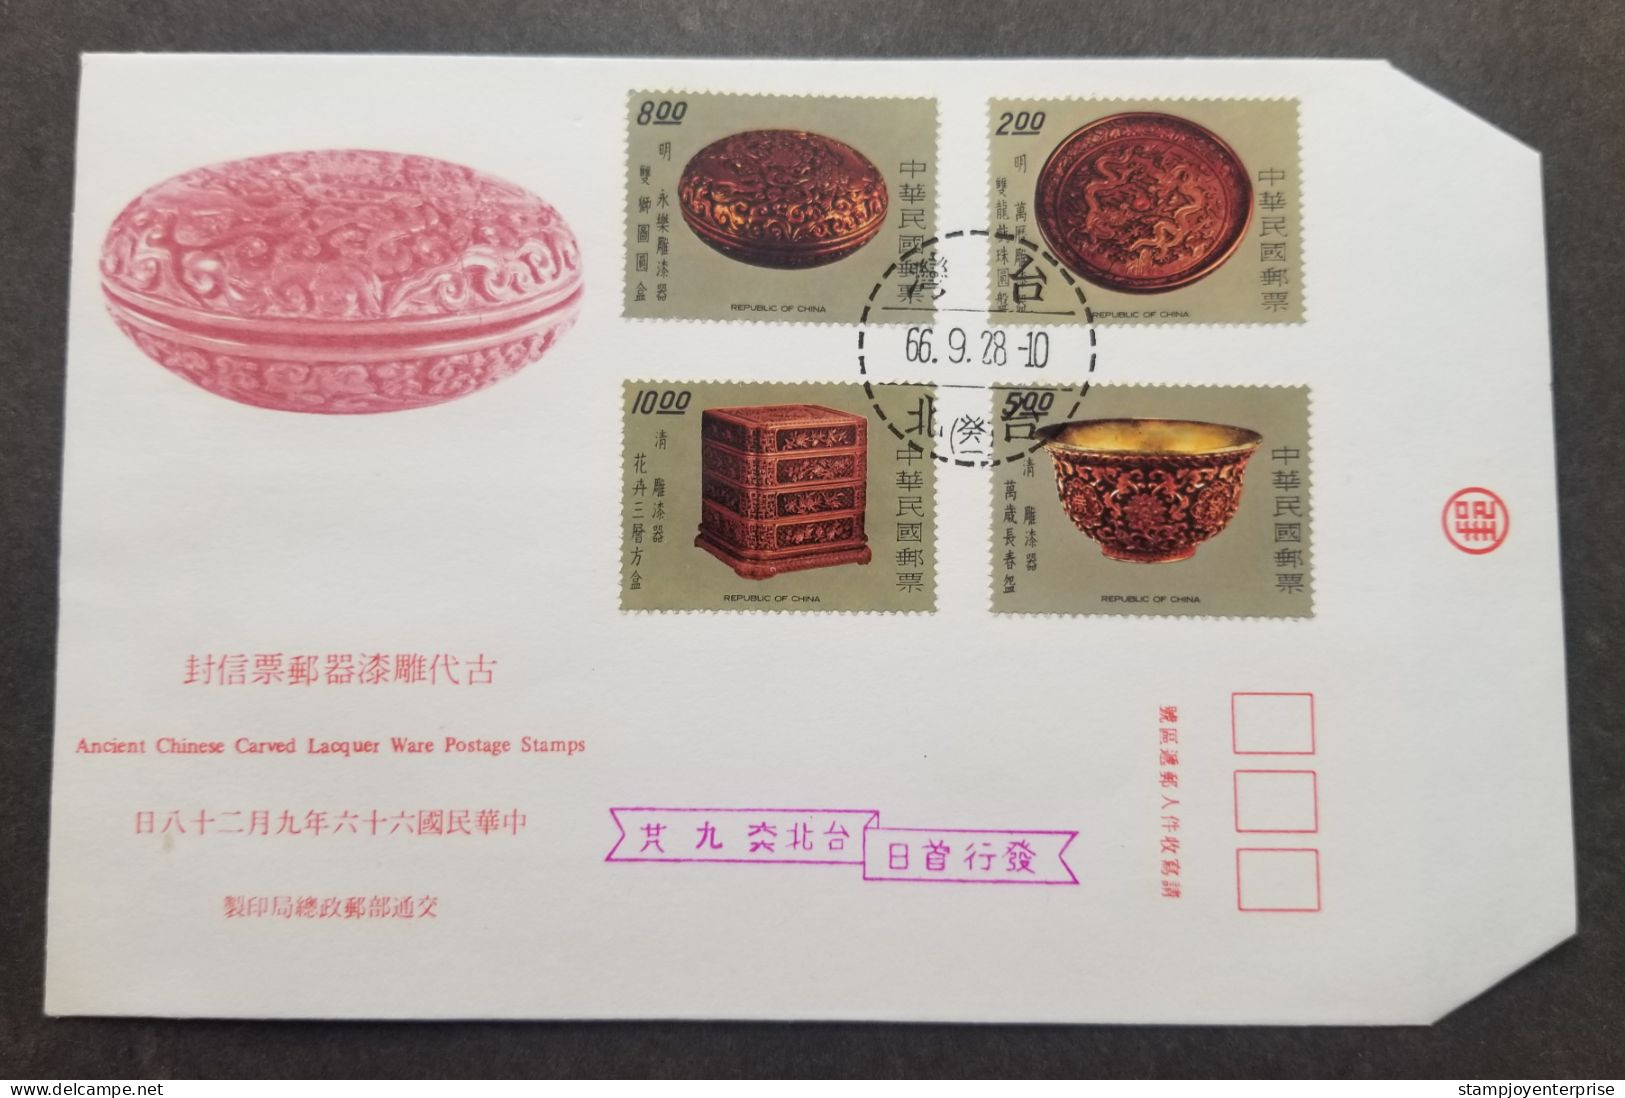 Taiwan Ancient Chinese Carved Lacquer Ware 1977 Craft Dragon (stamp FDC) - Storia Postale